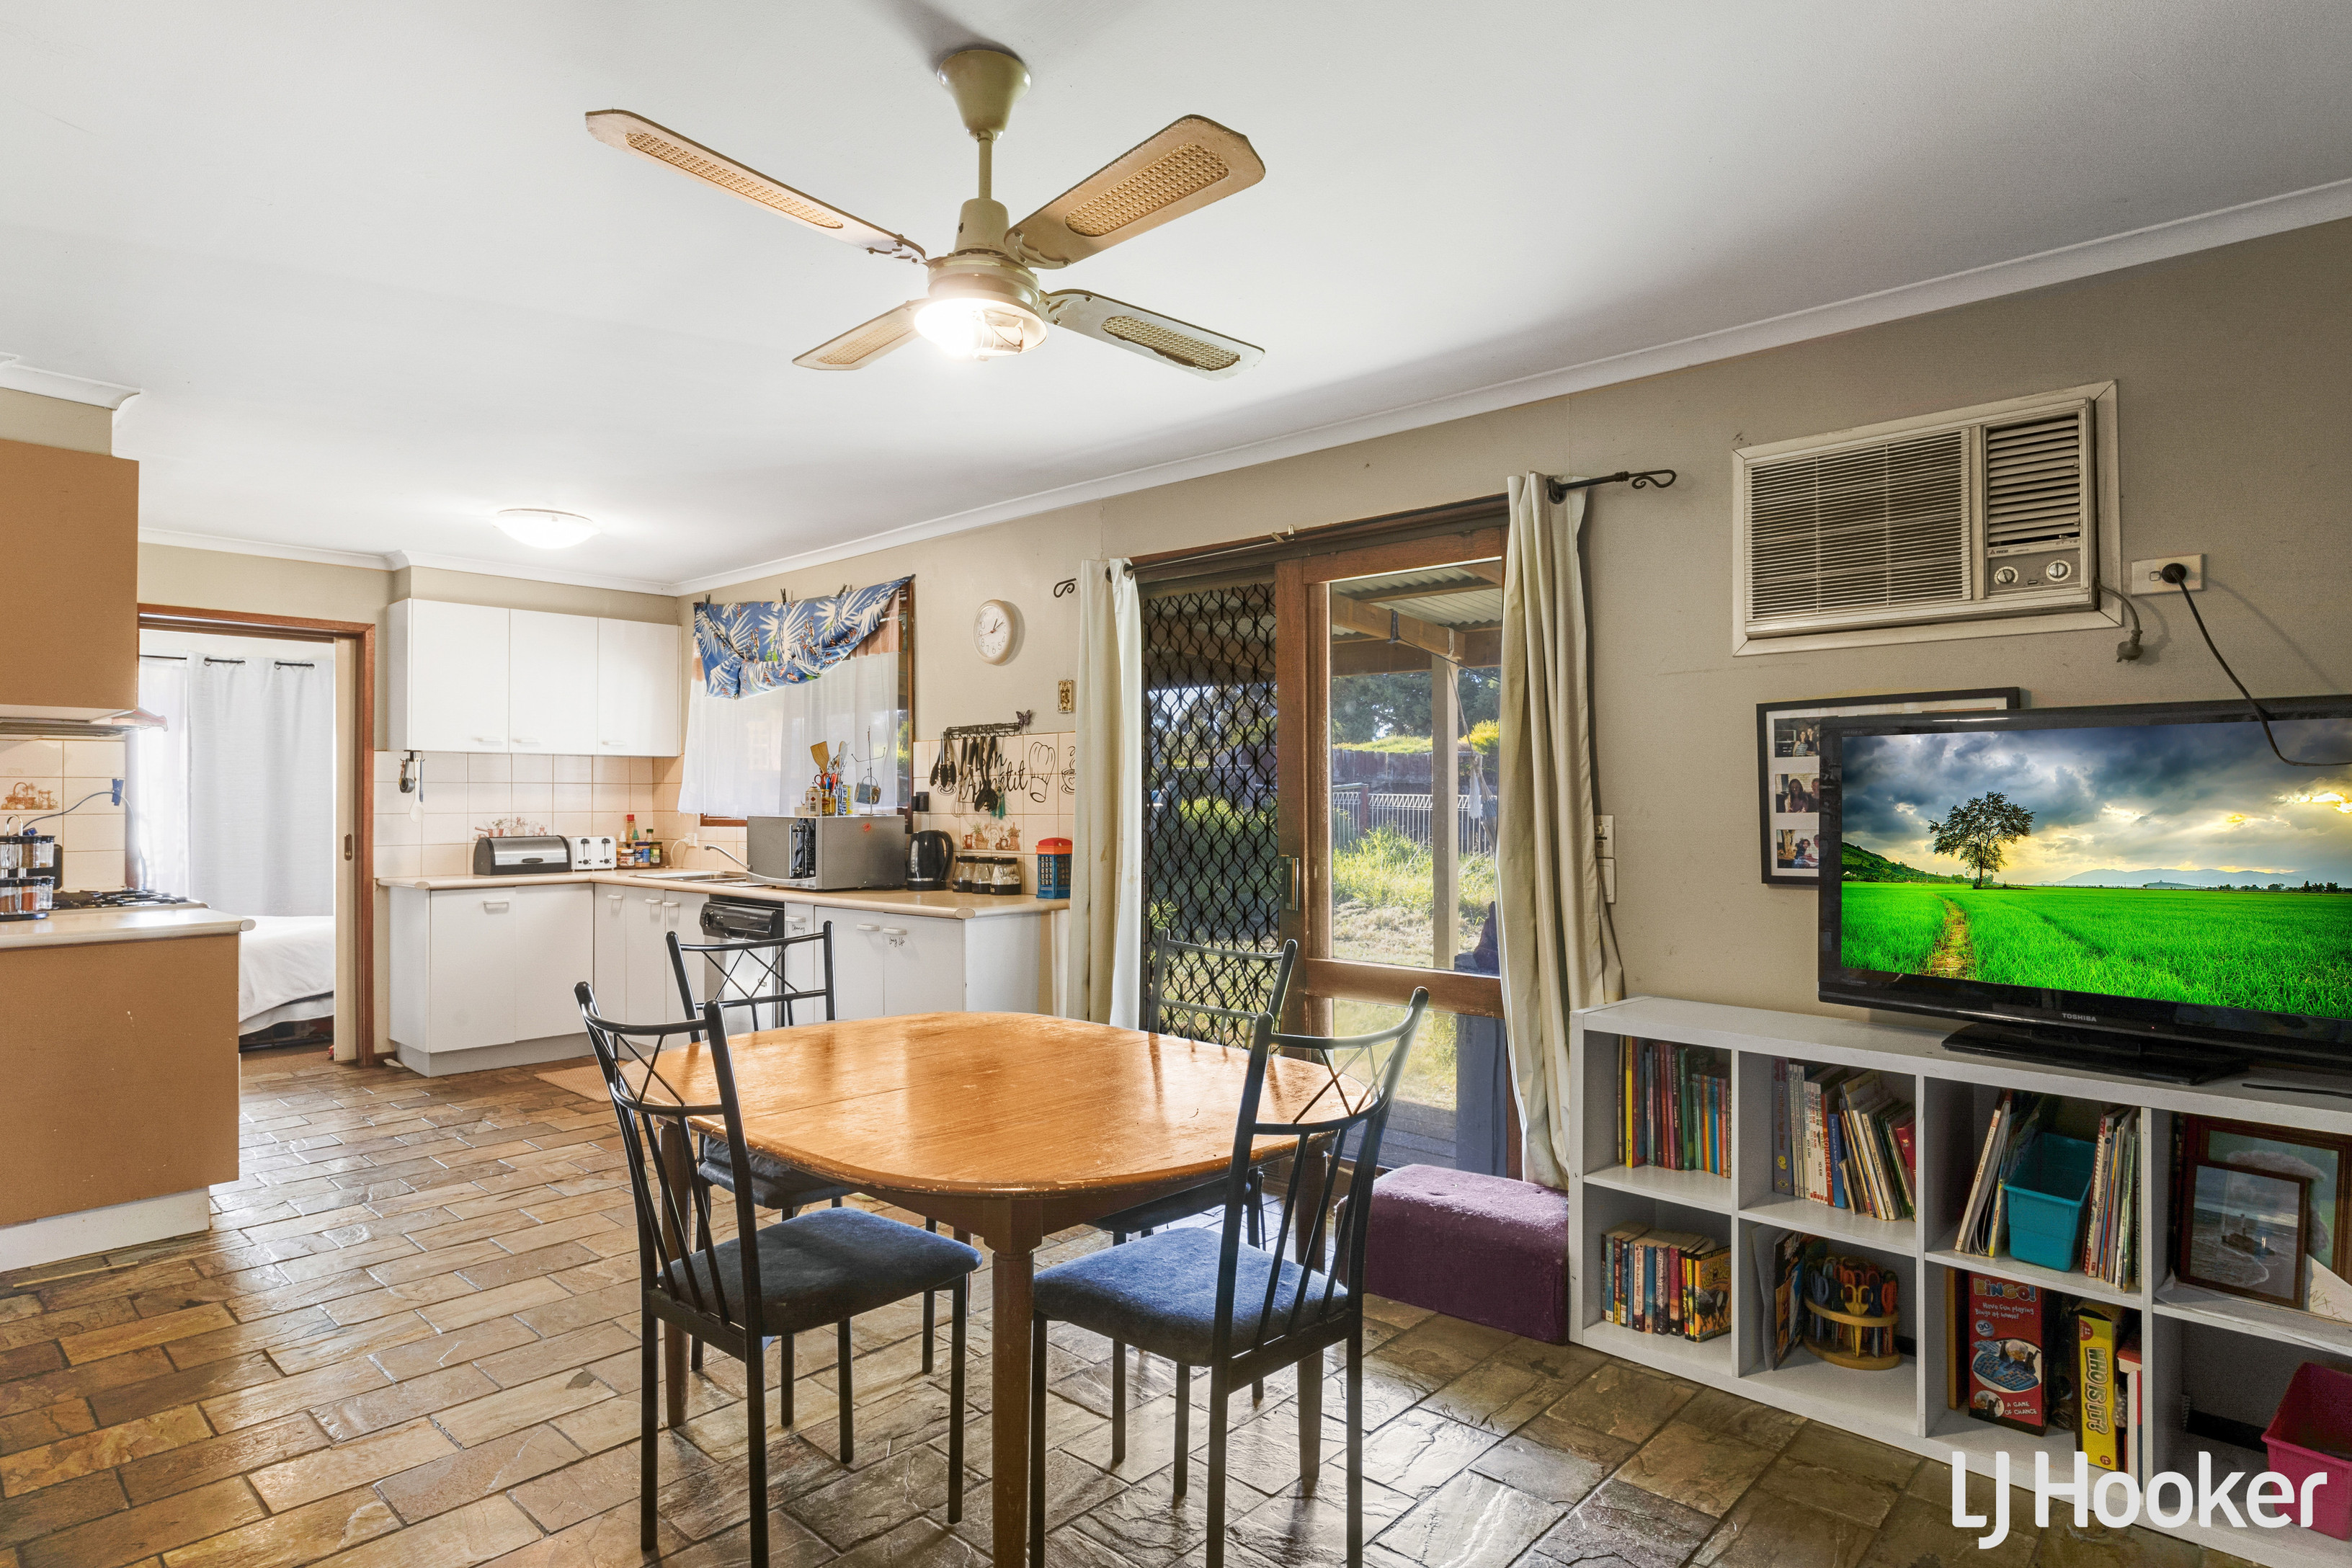 53 James Cook Drive, Melton West, VIC 3337, 3房, 1浴, House